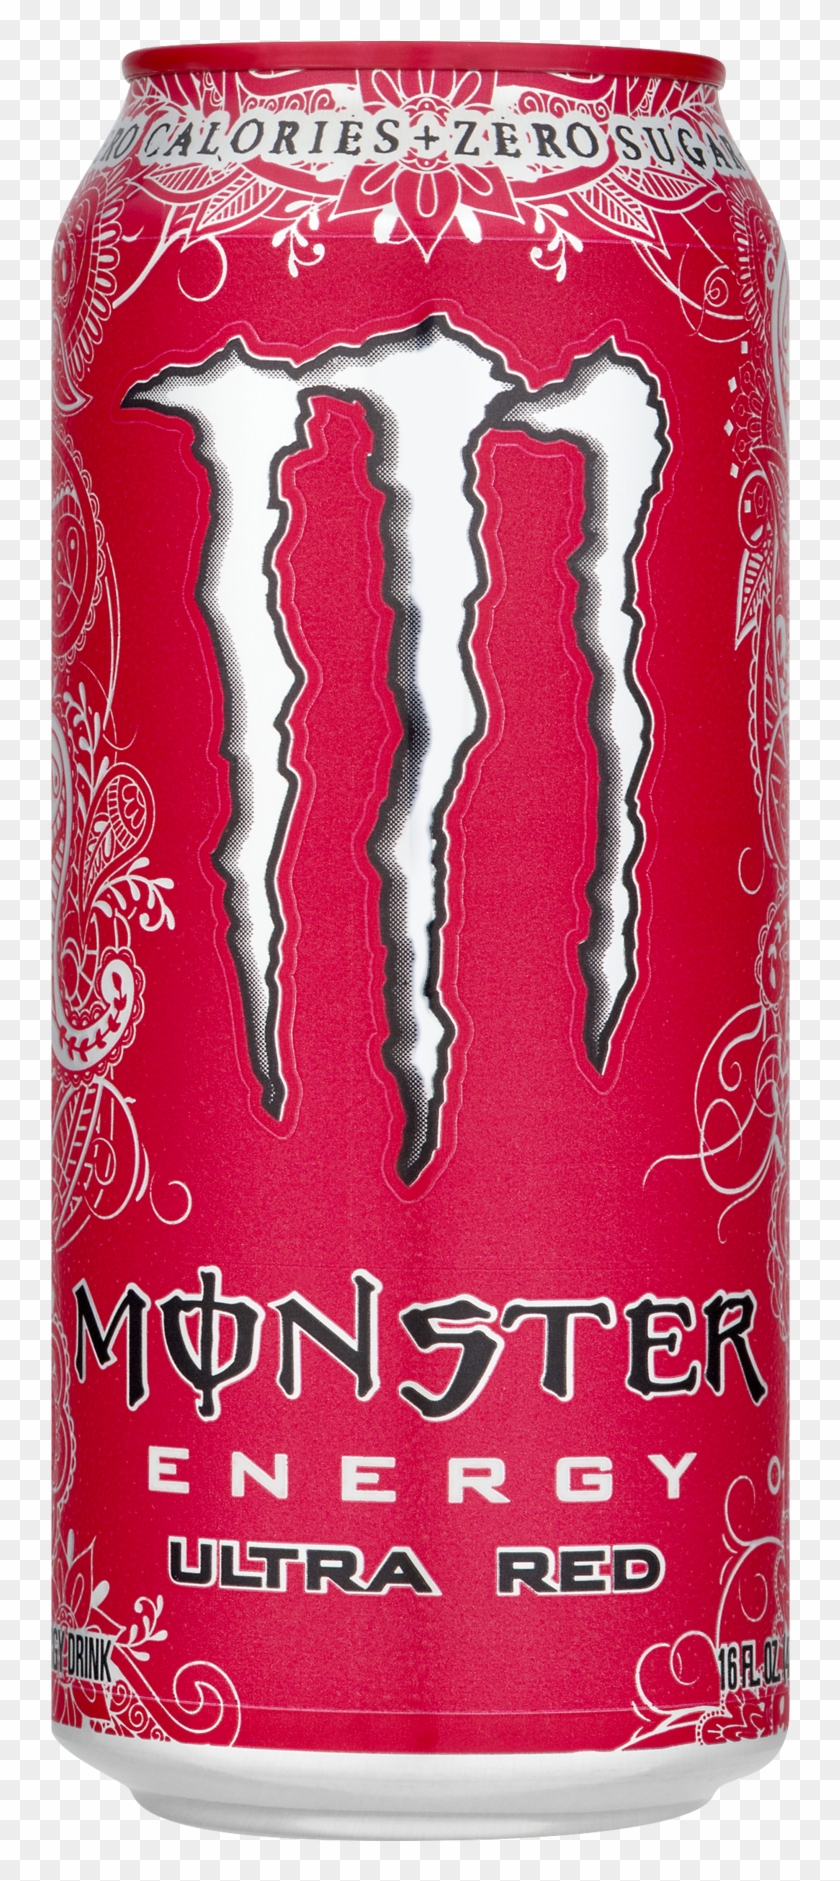 Monster Energy Ultra Red Hd Png Download 1800x1800 141634